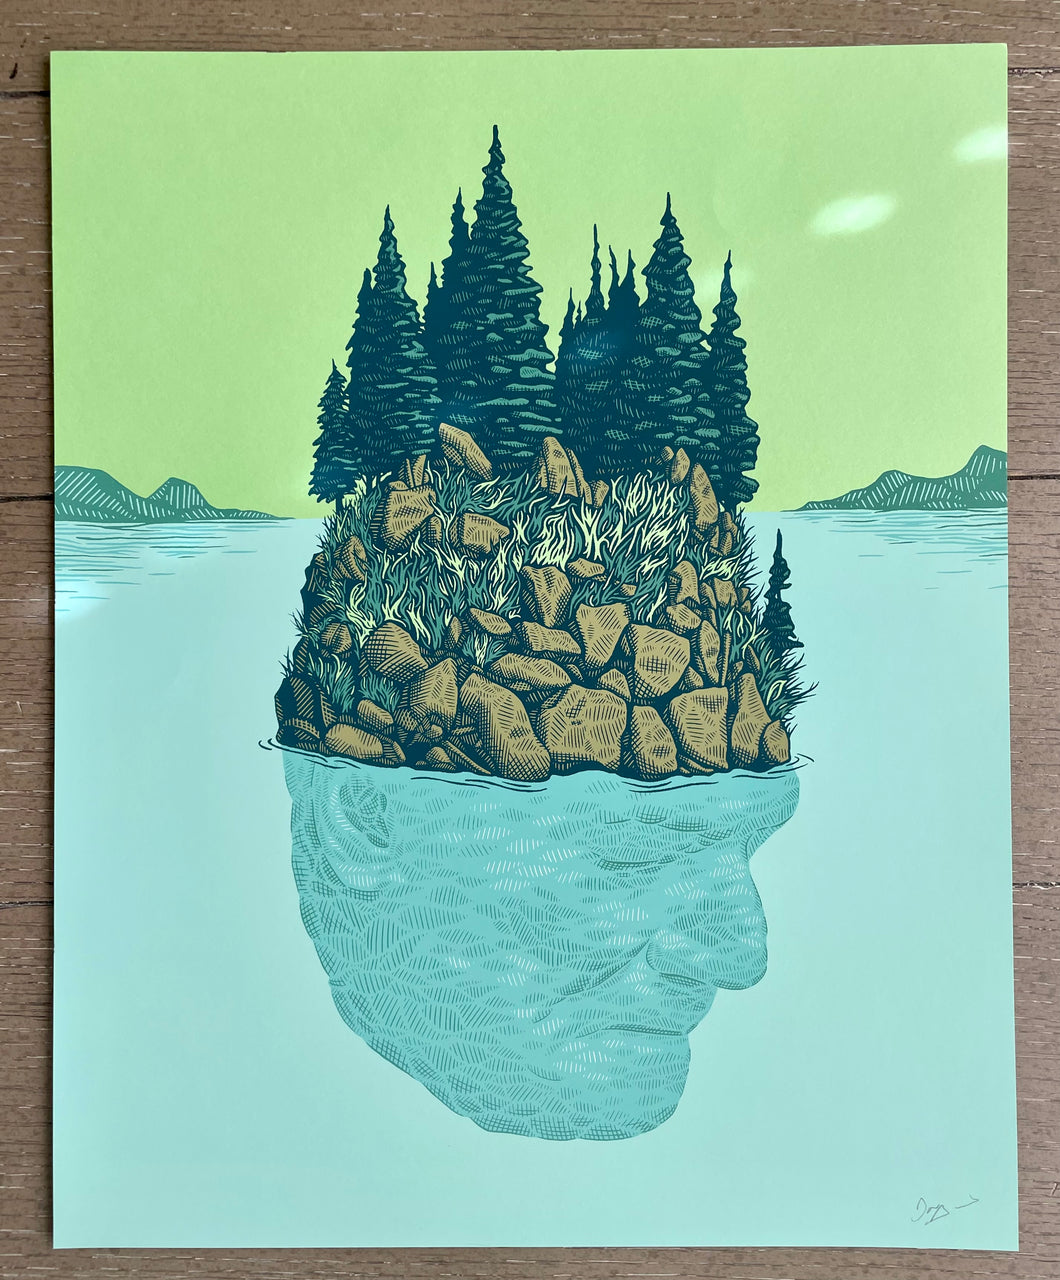 Biscuit Press 'I Dreamt I was an Island' Signed Print